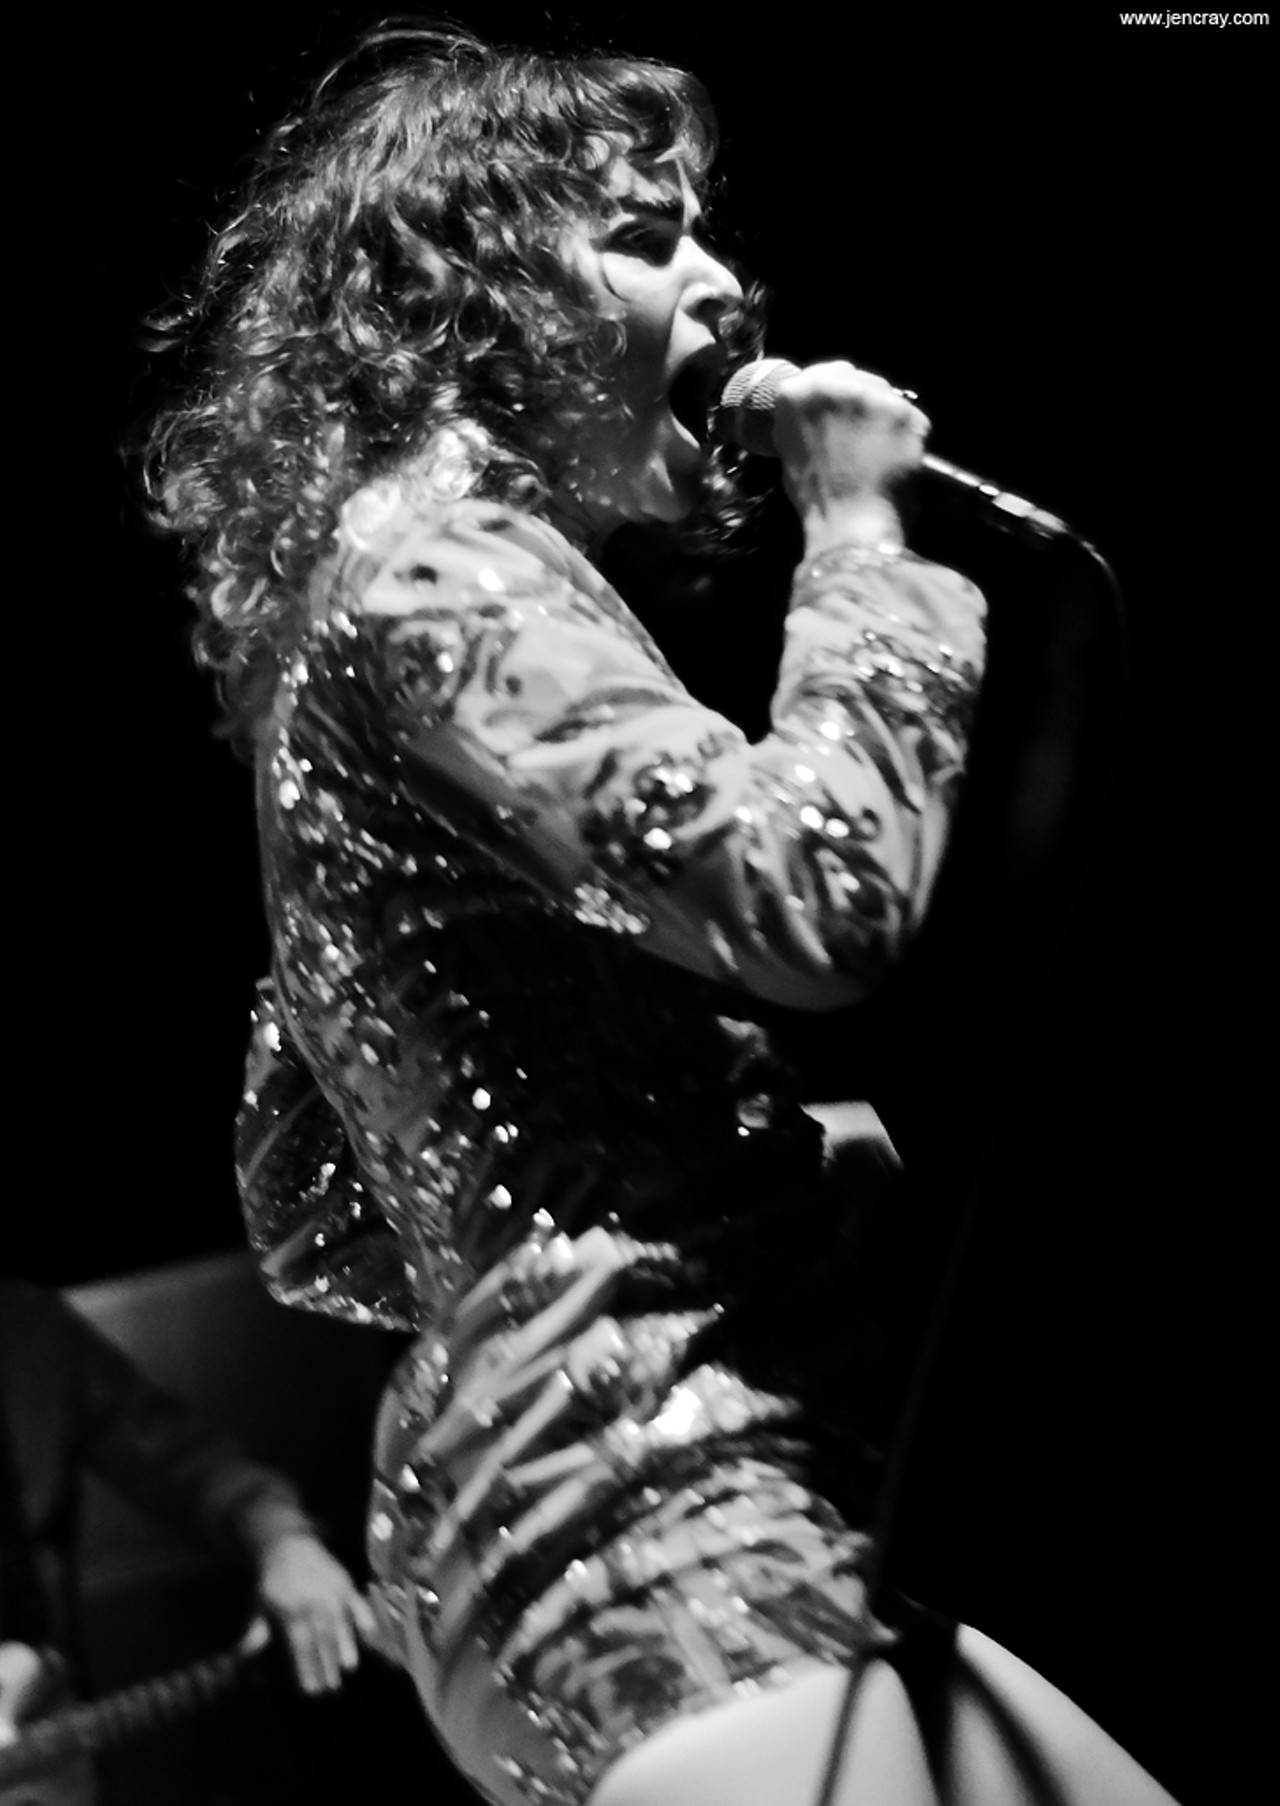 Photos from the Growlers and Donzii at the Plaza Live